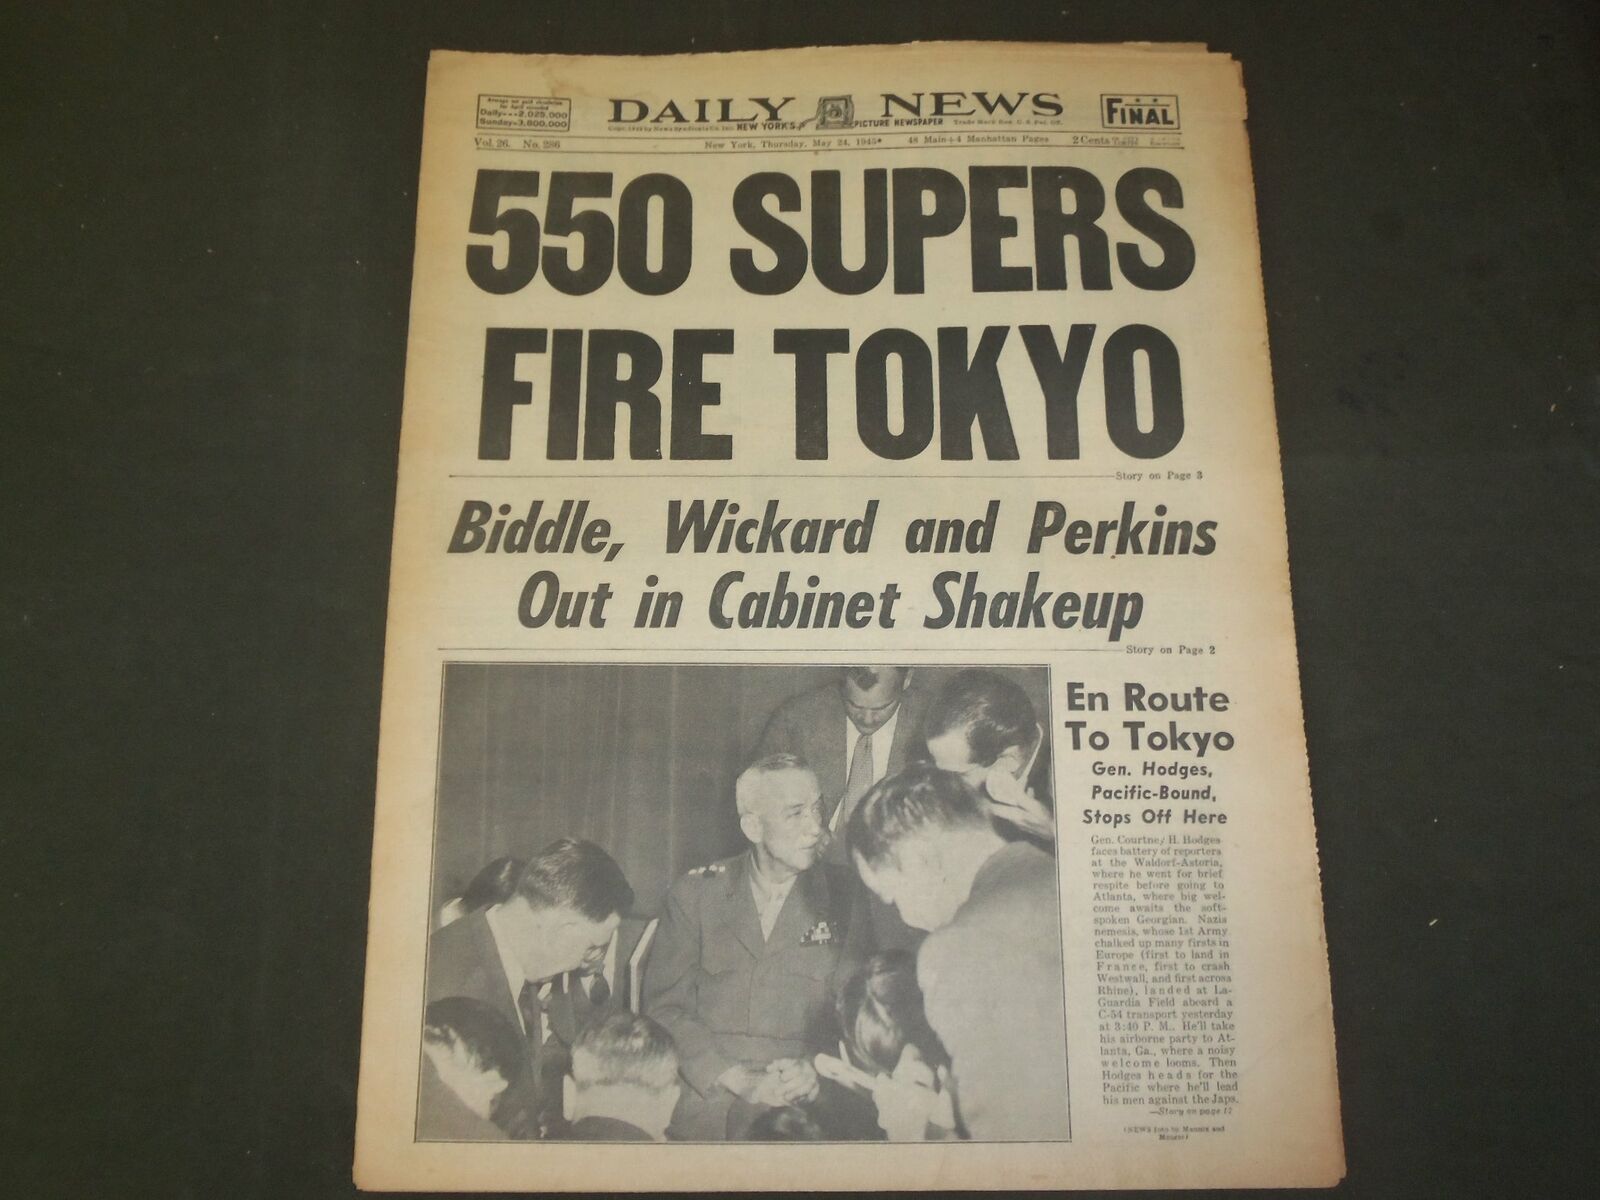 1945 MAY 24 NEW YORK DAILY NEWS - 550 SUPERS FIRE TOKYO - NP 4342